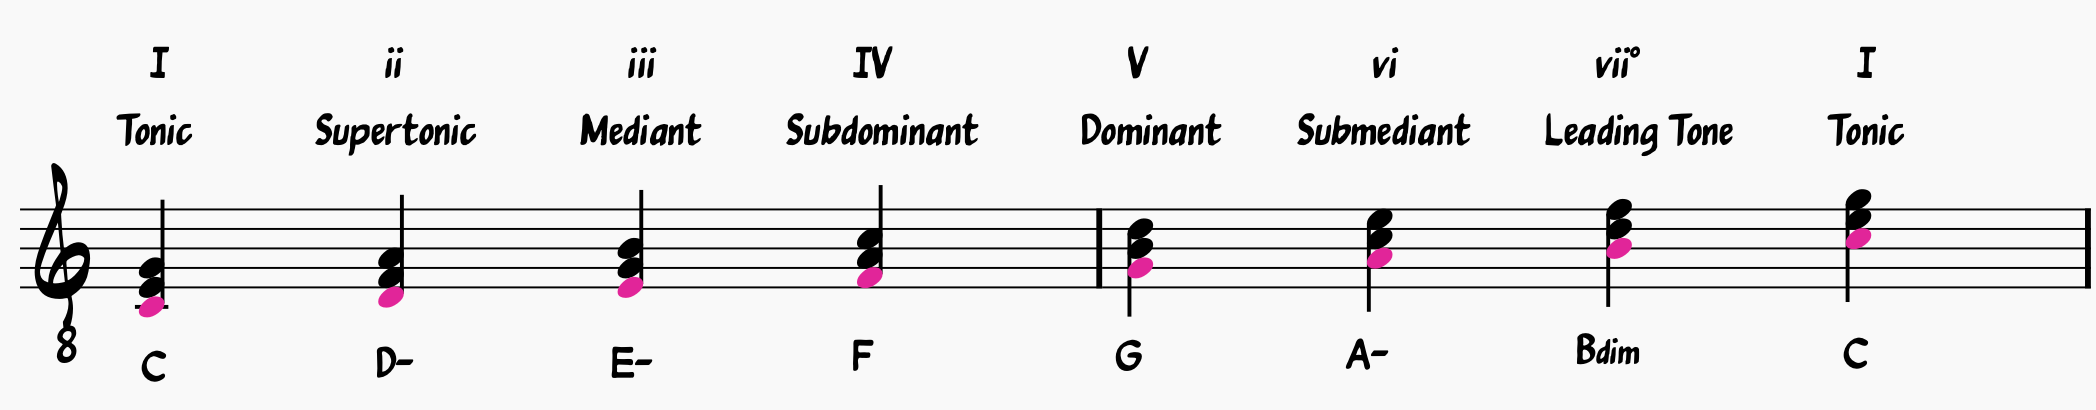 Diatonic Triads Built From the Major Scale